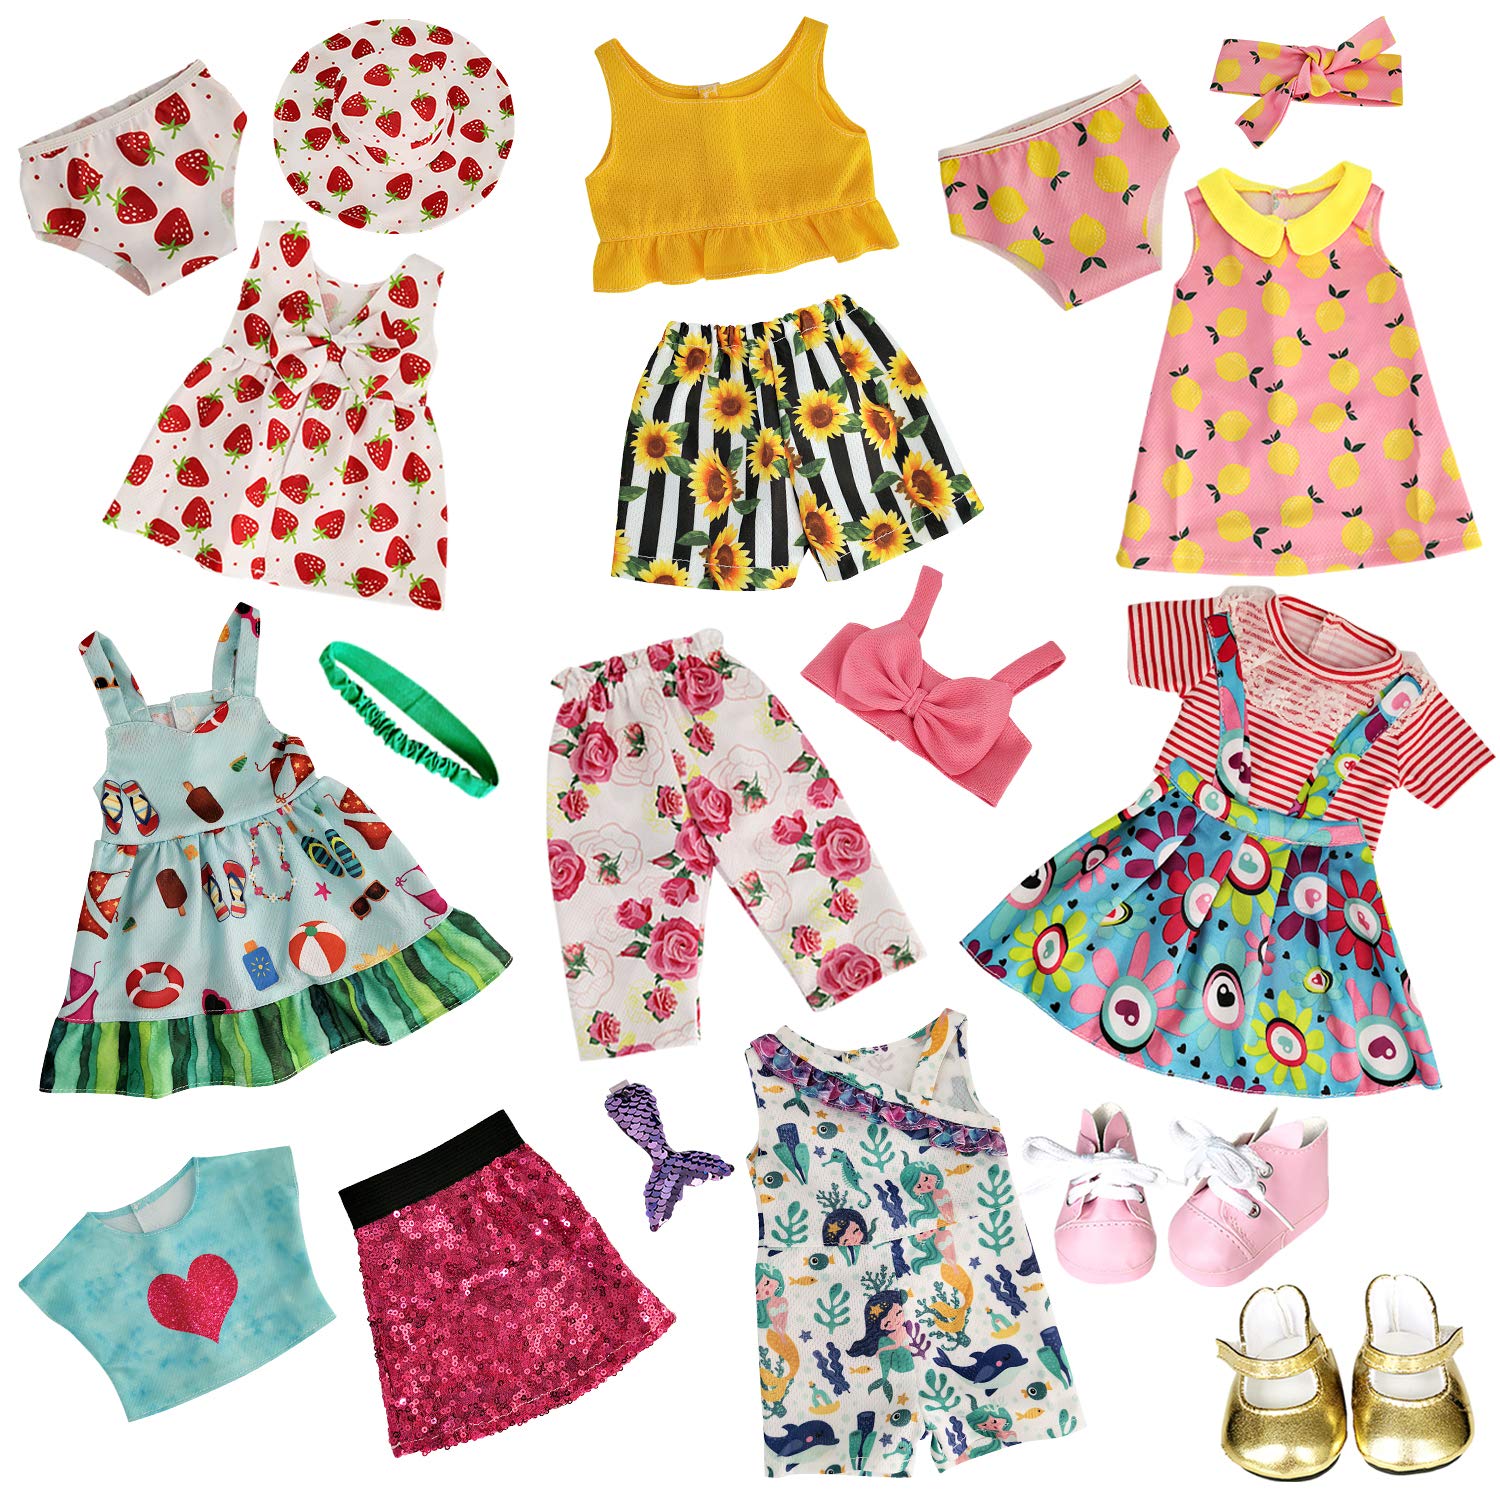 HOAKWA American Doll Clothes and Accessories for 18 Inch Doll, 18